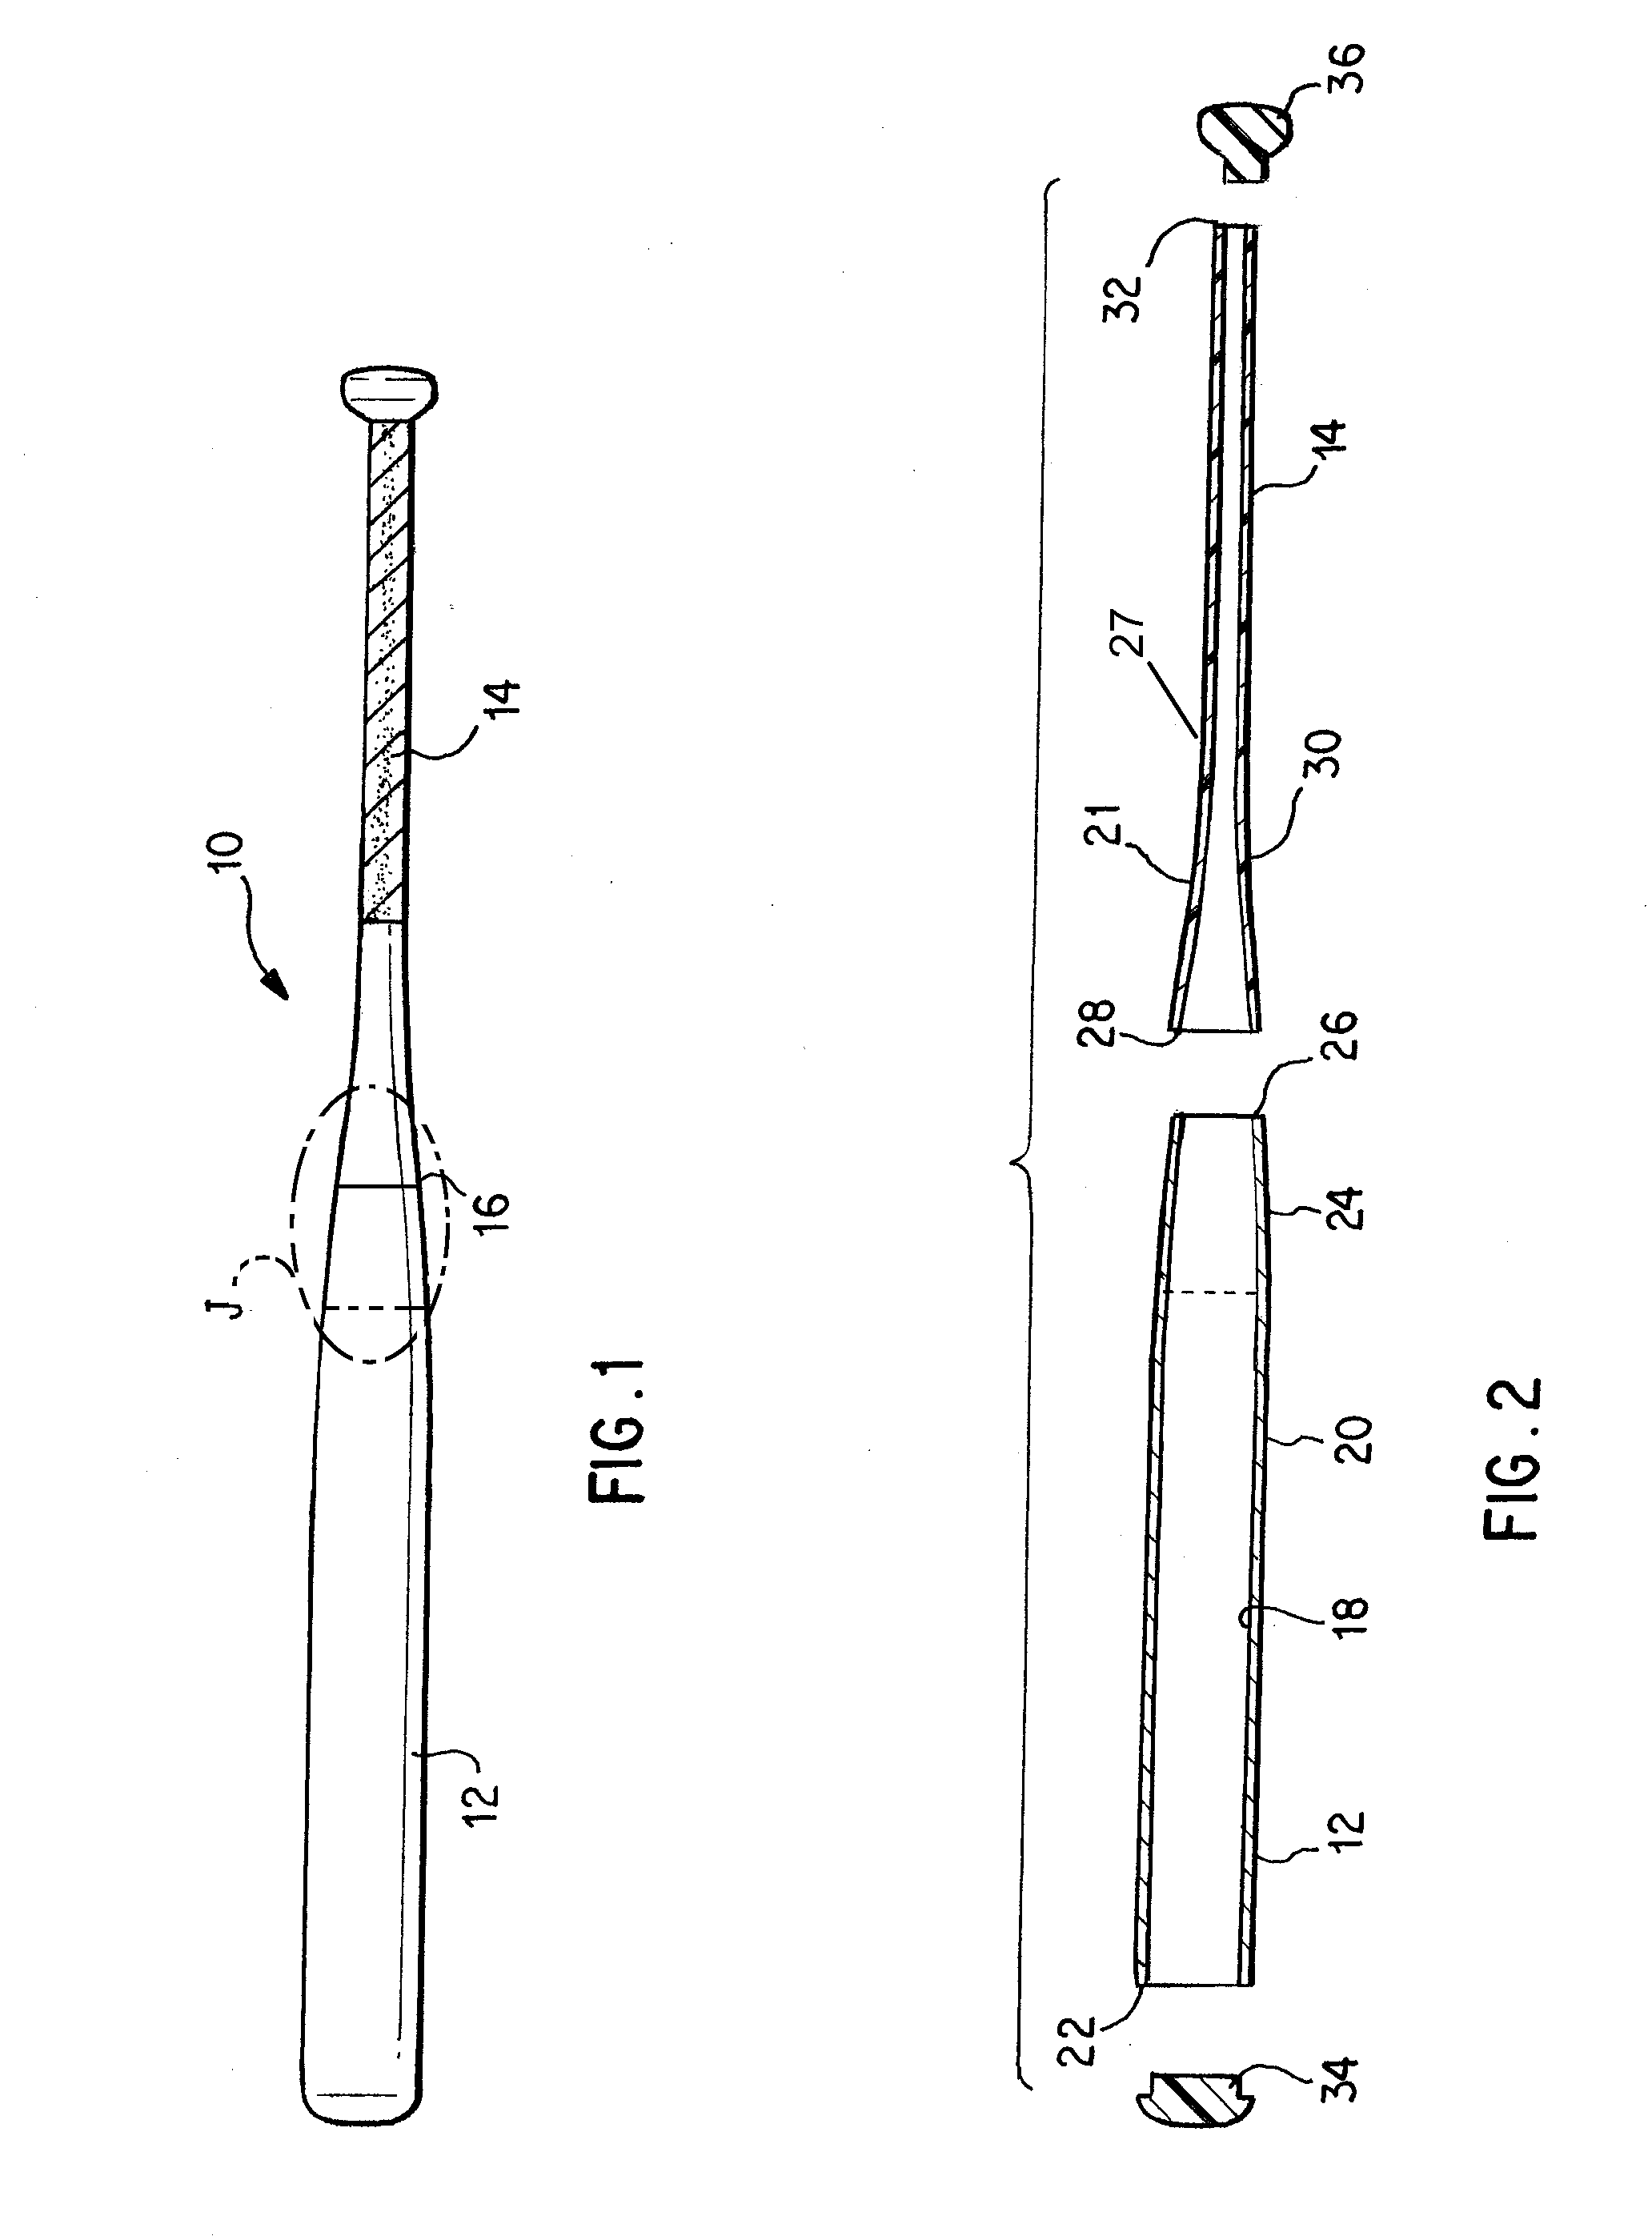 Two-piece ball bat with rigid connection